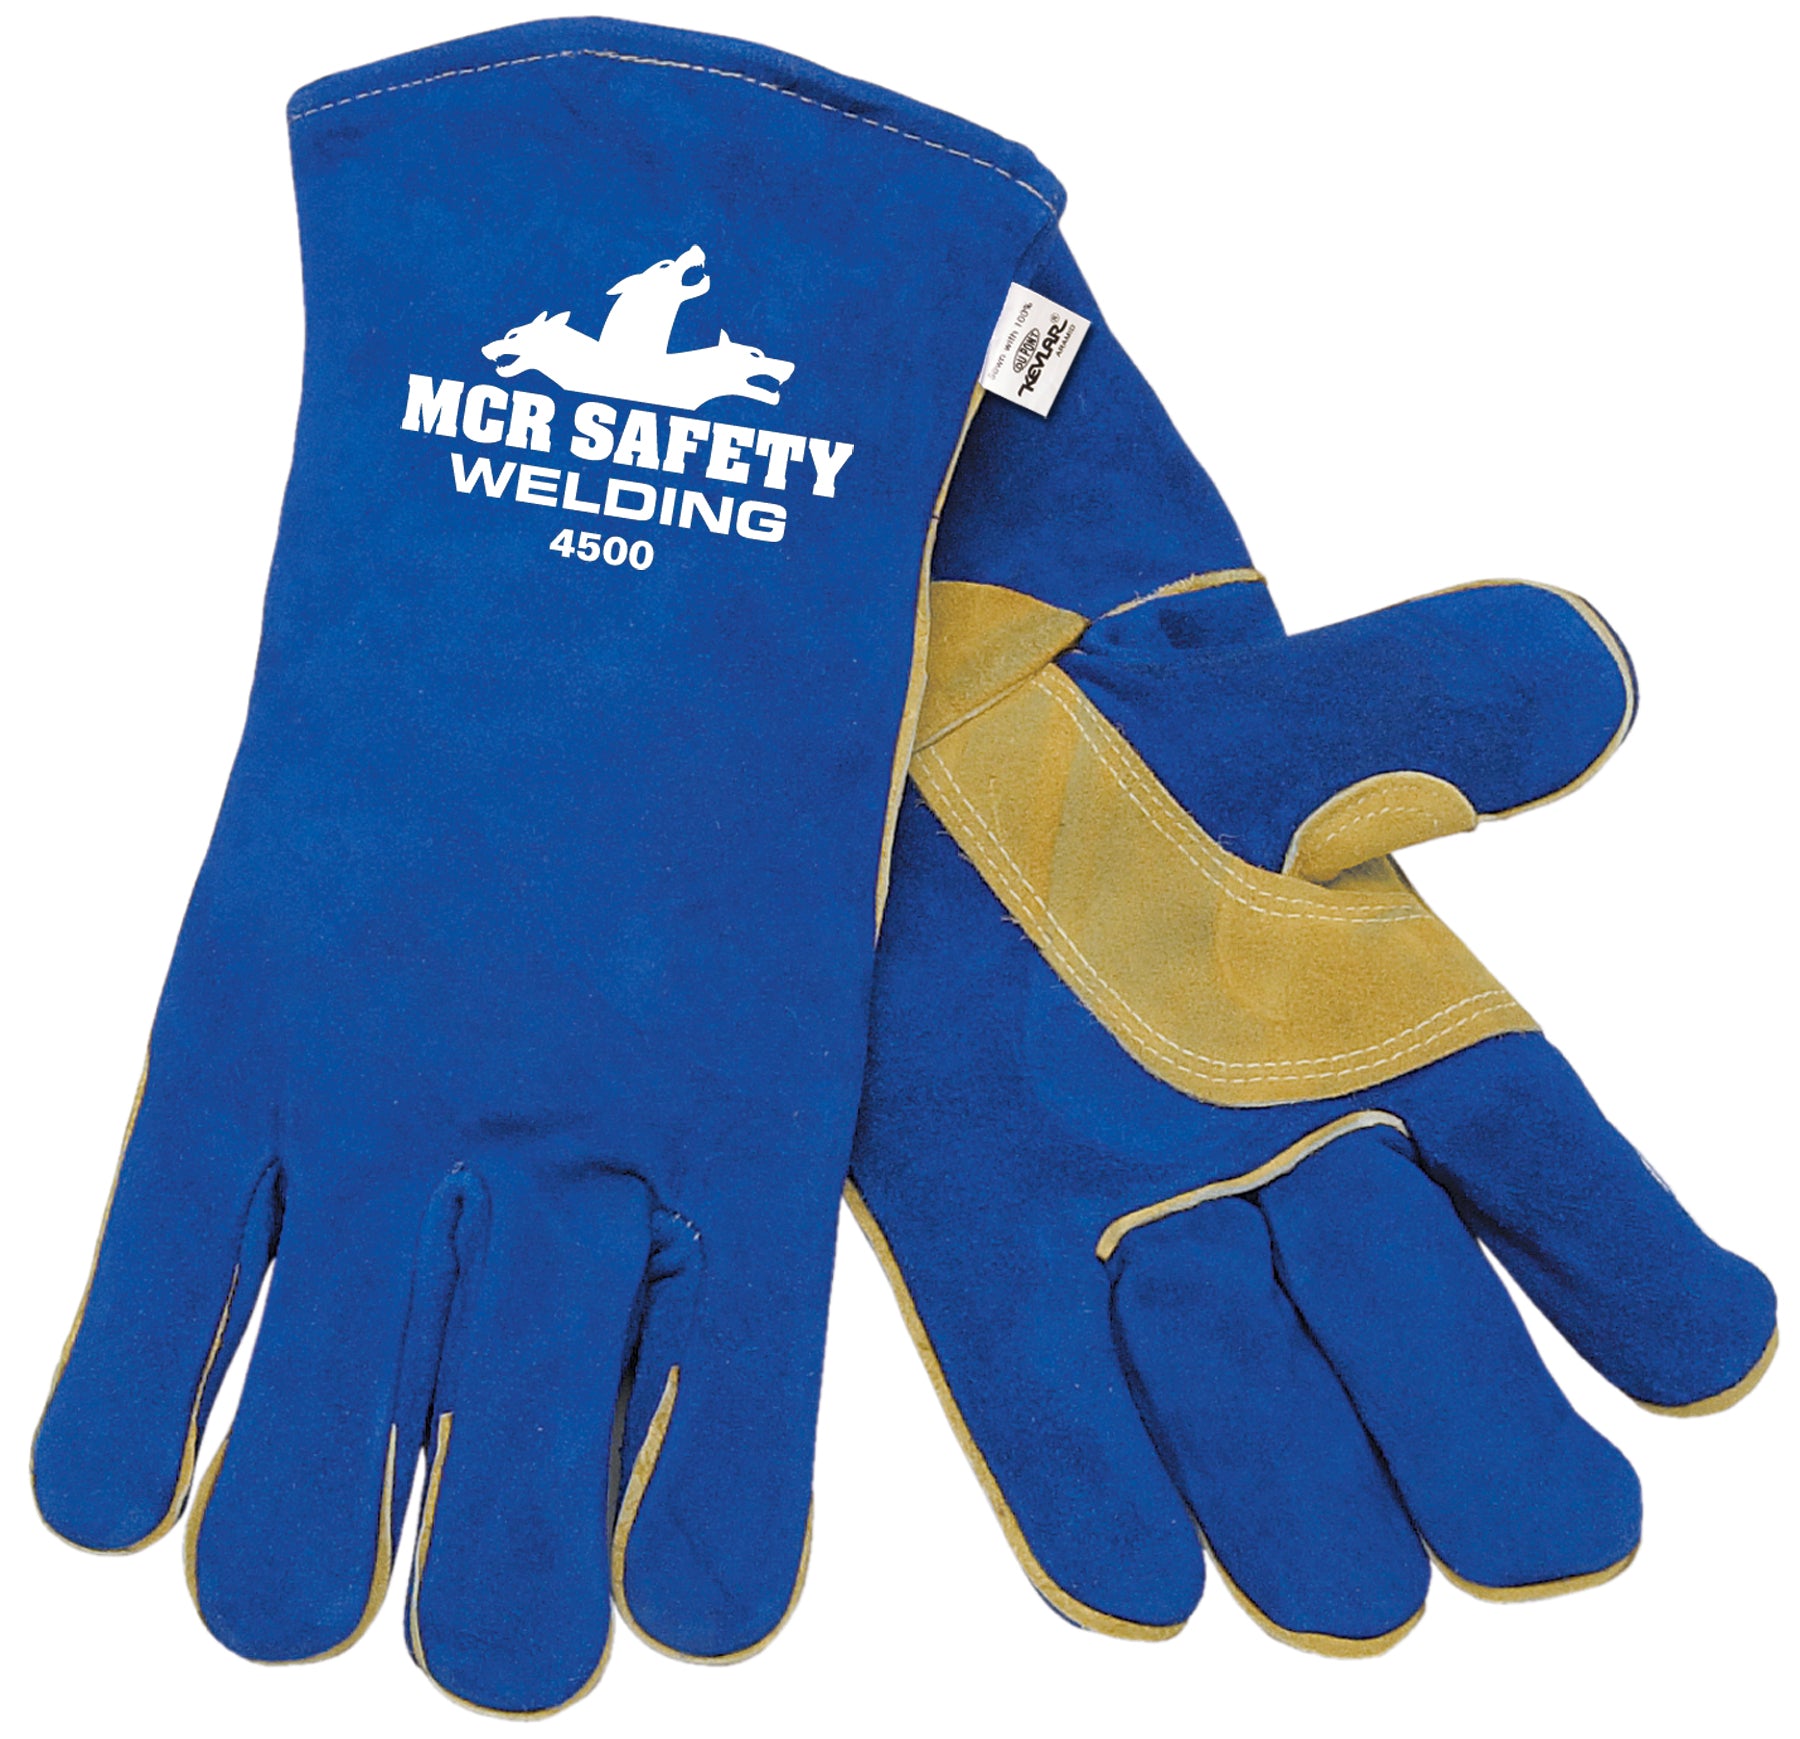 Maritec Stainless Steel Protection Fillet Glove